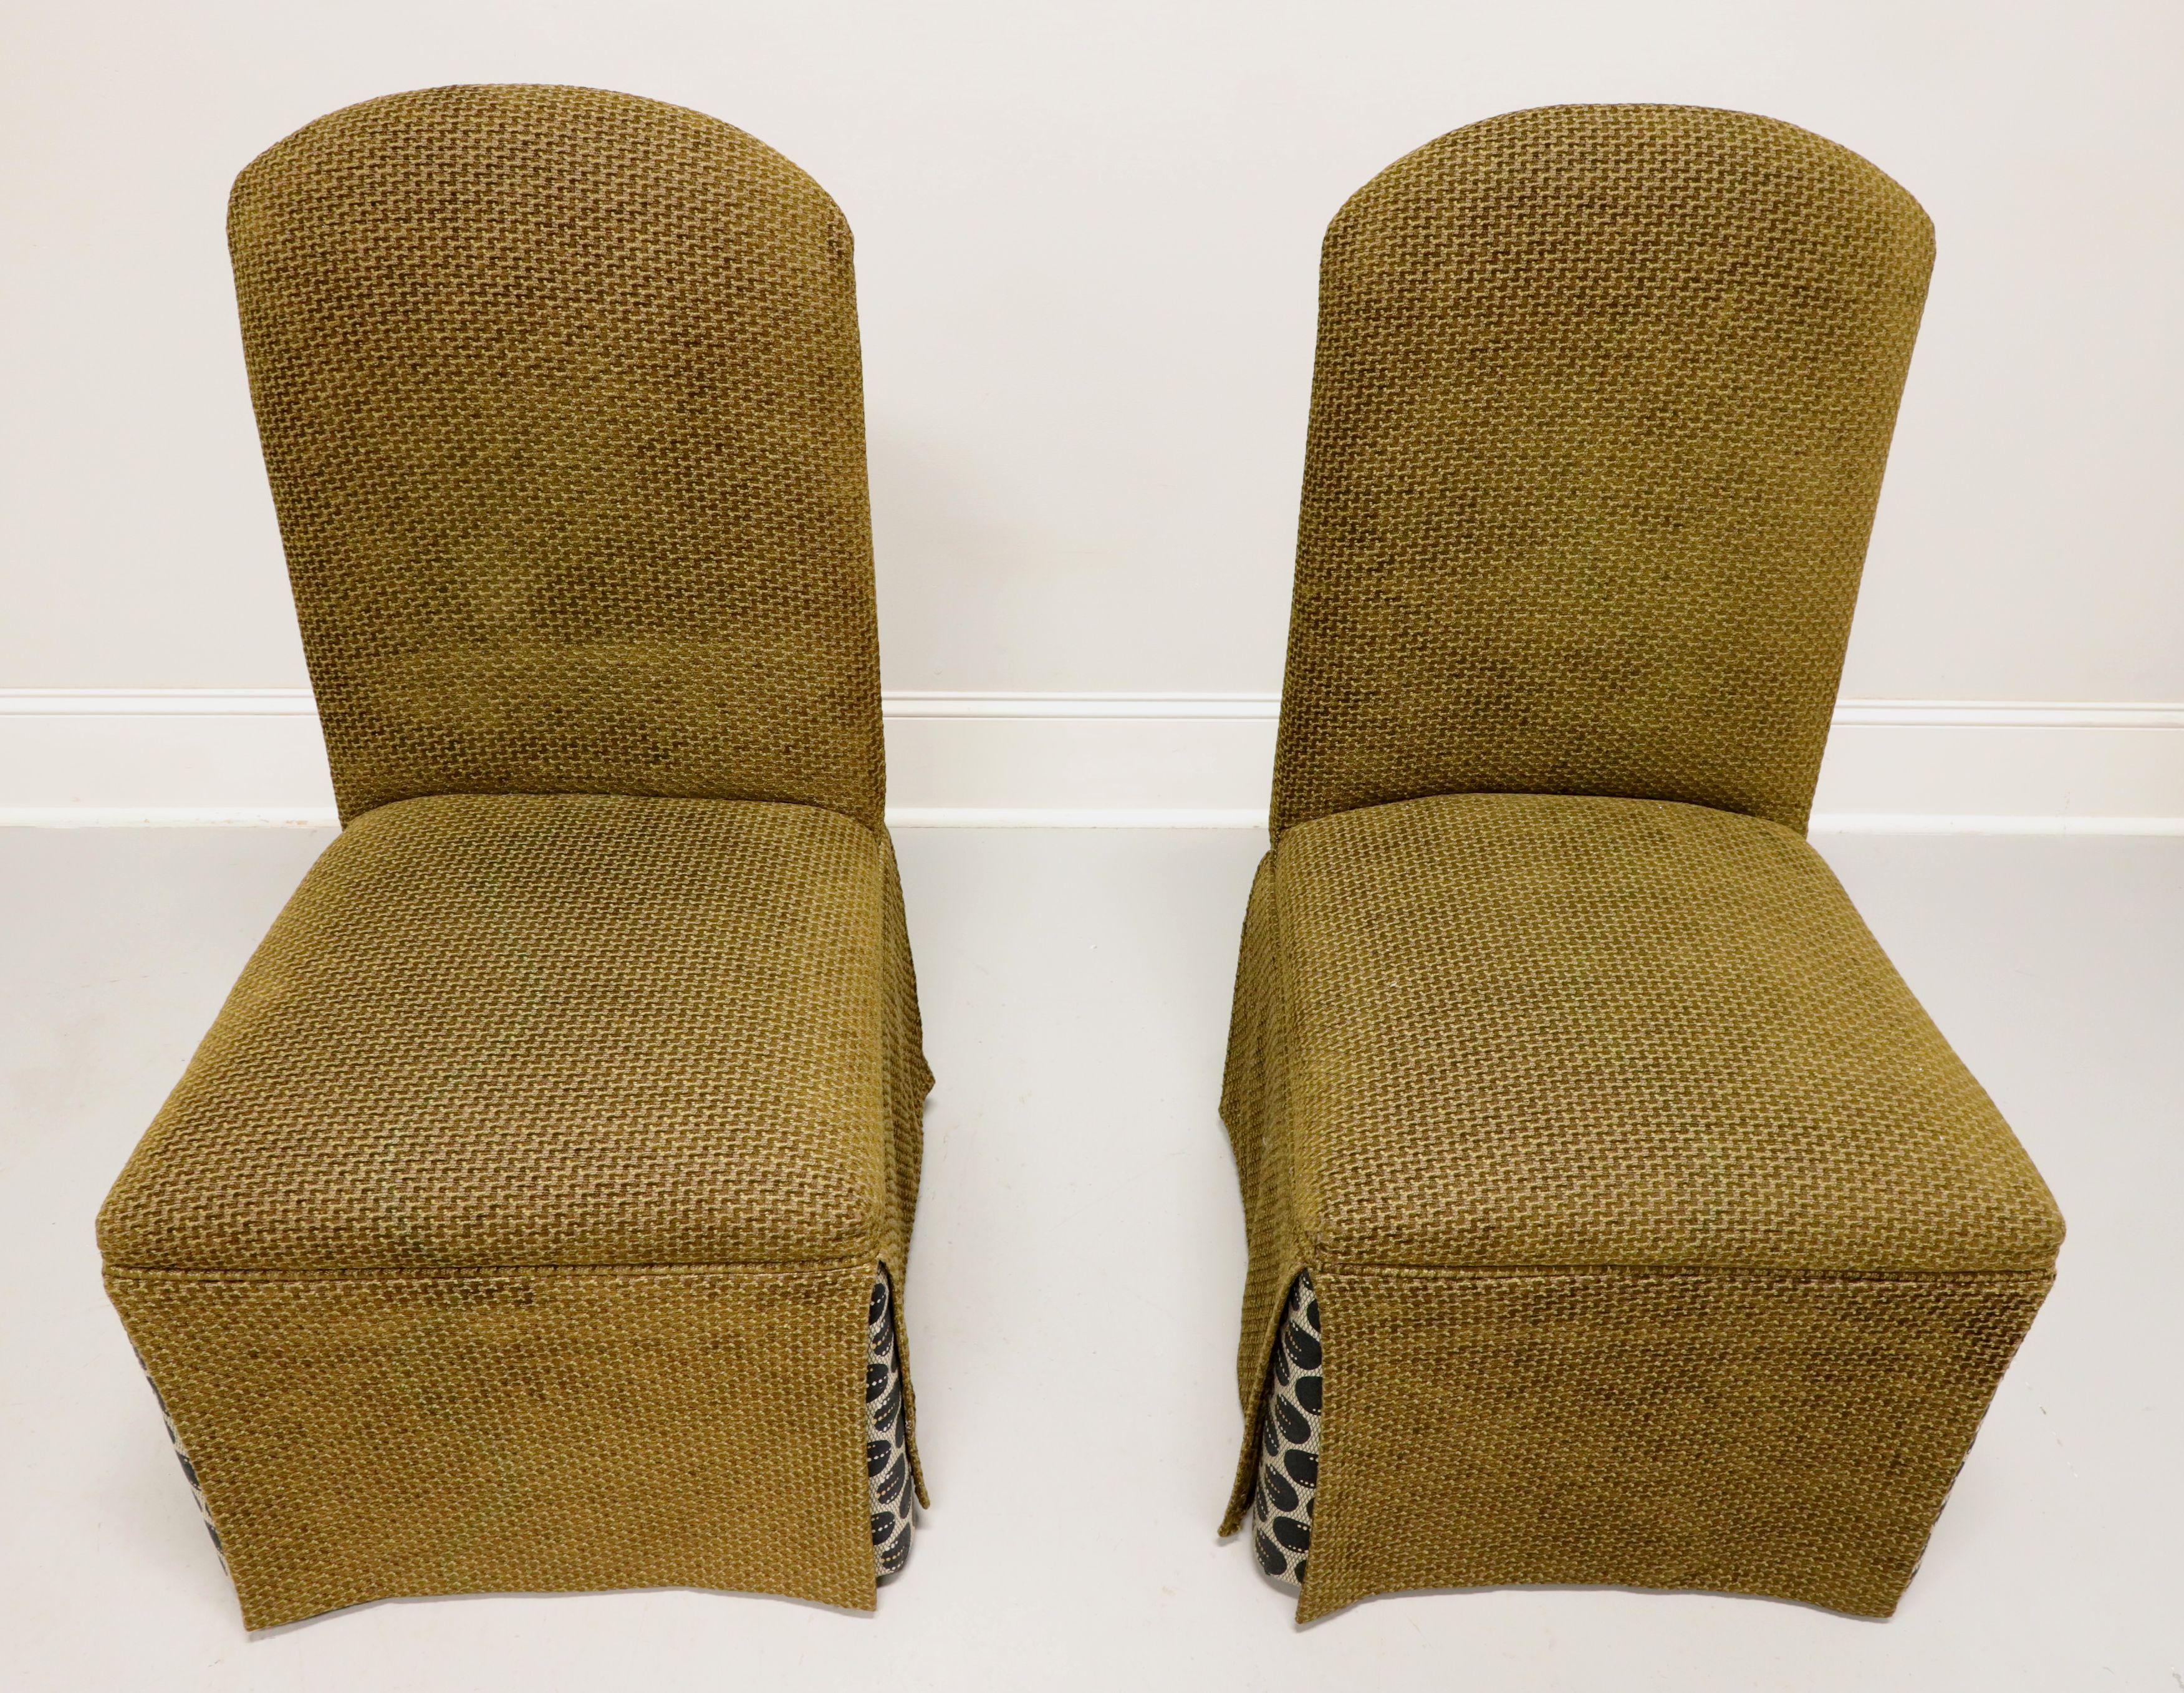 A pair of Transitional style Parsons chairs, unbranded, similar quality to Lane. Solid wood frame, olive green color tweed like fabric upholstered, fully skirted with corner underskirts in a circular pattern of black, beige and brown. Made in the